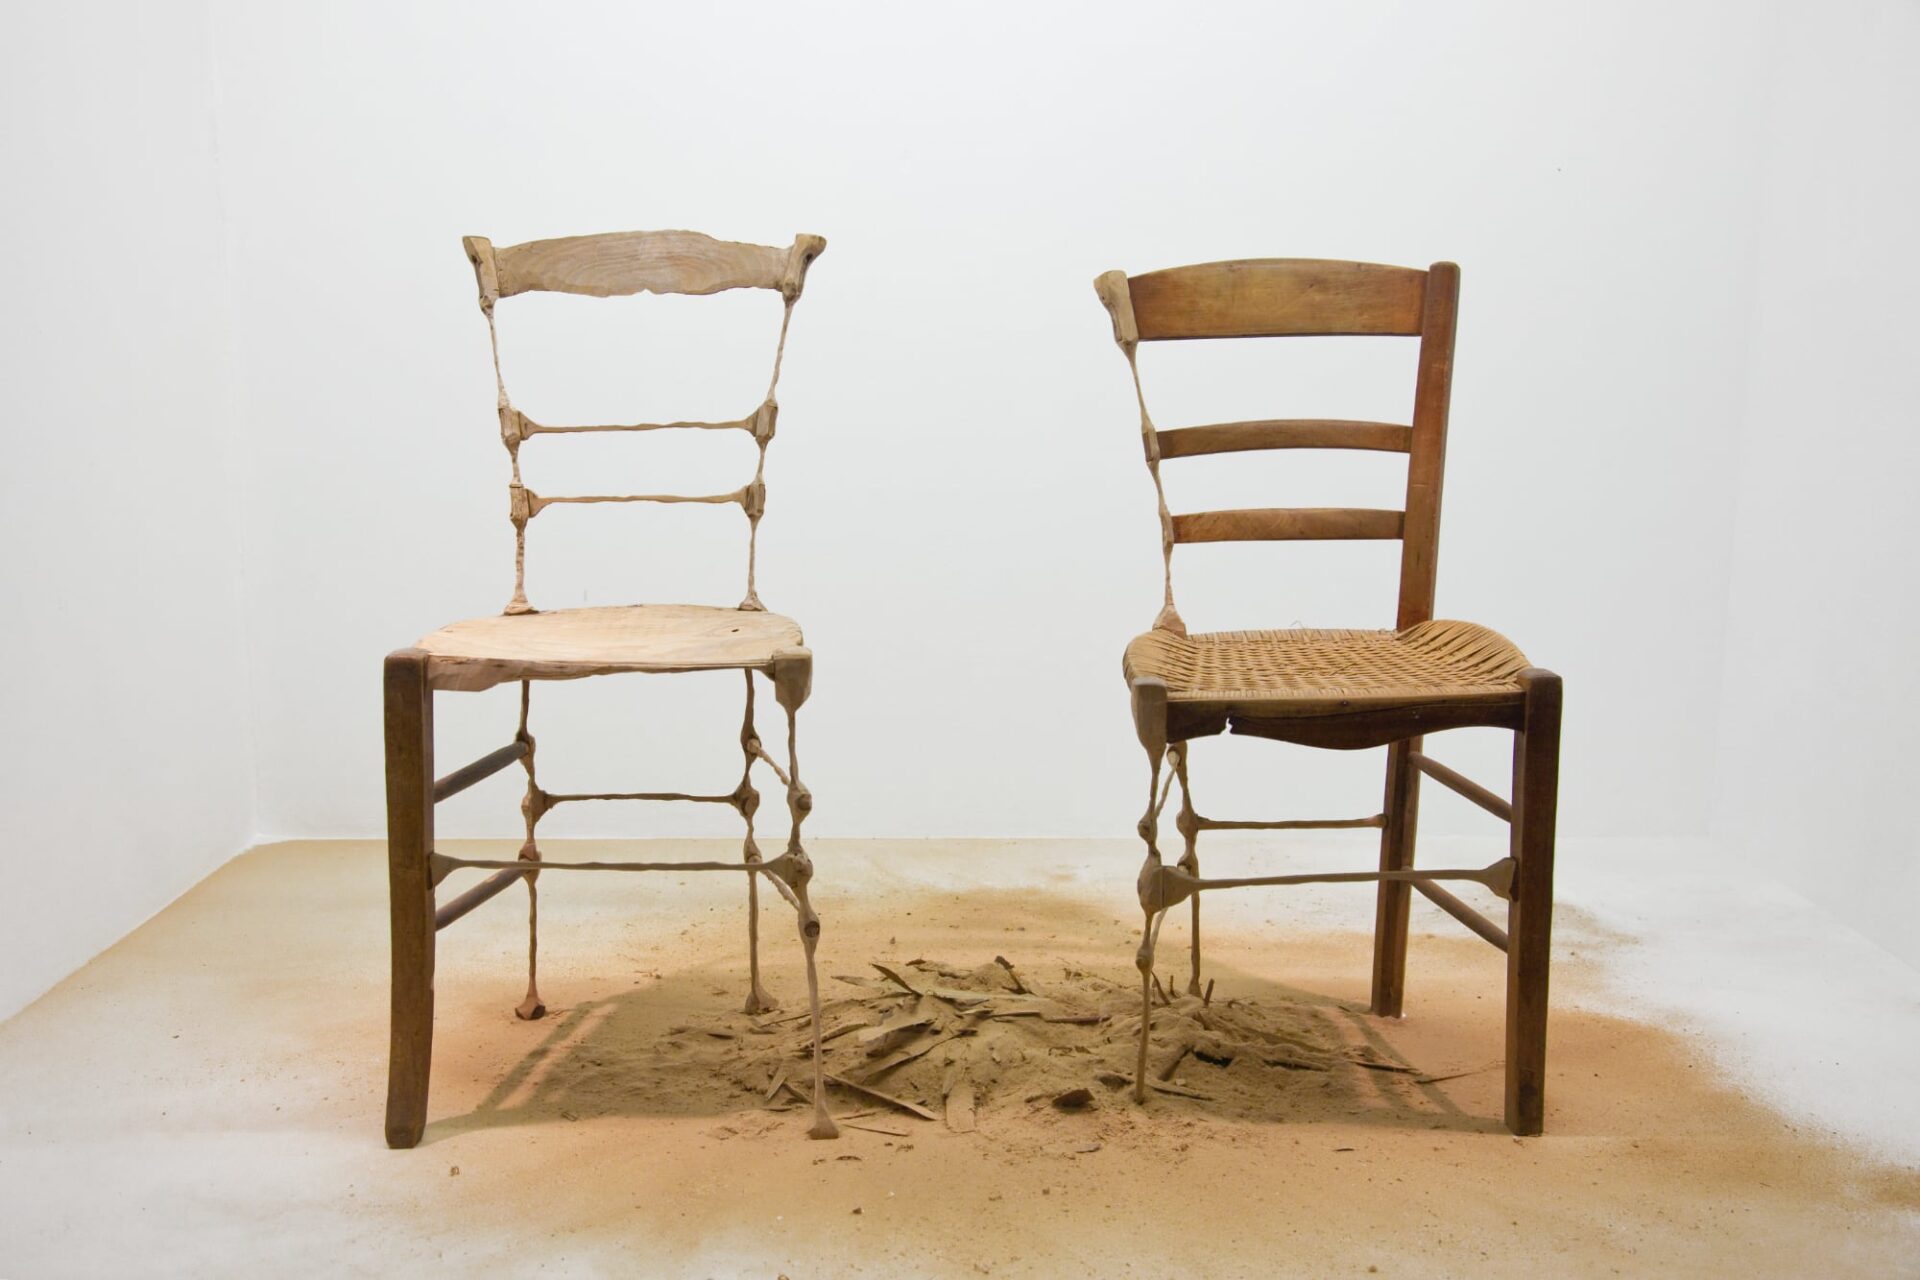 two wooden chairs sitting side by side with their inner leg sawed down to spindly bits